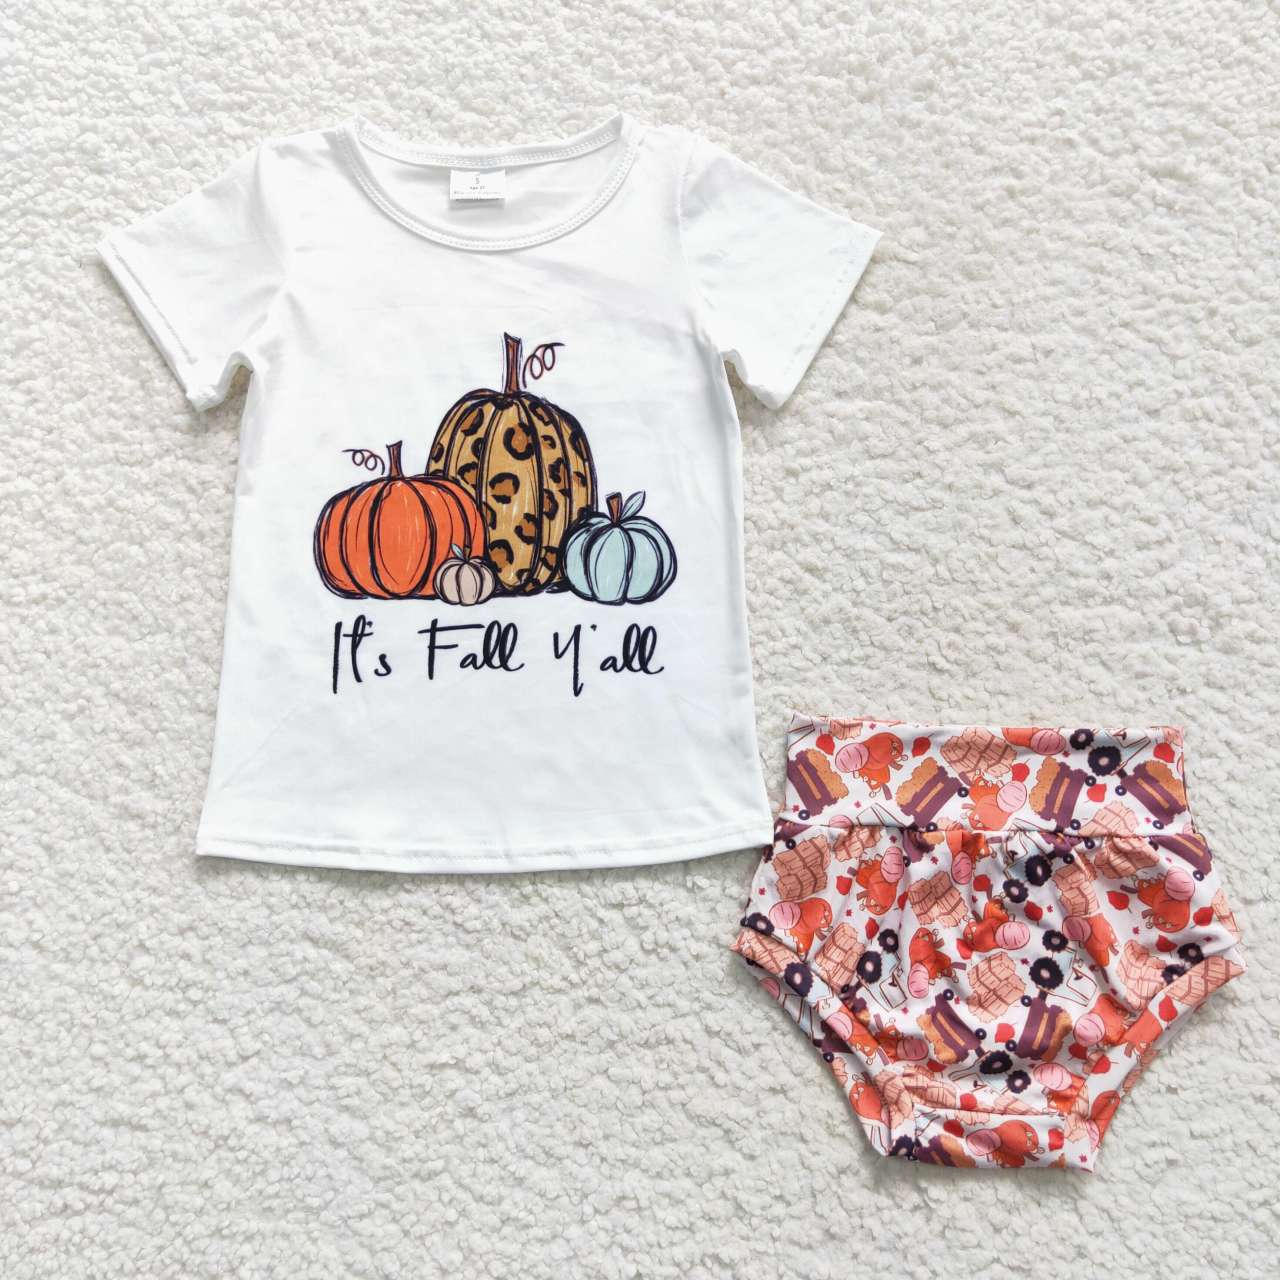 GBO0182 it's fall y'all Pumpkin White Short Sleeve Brief Set+BOW